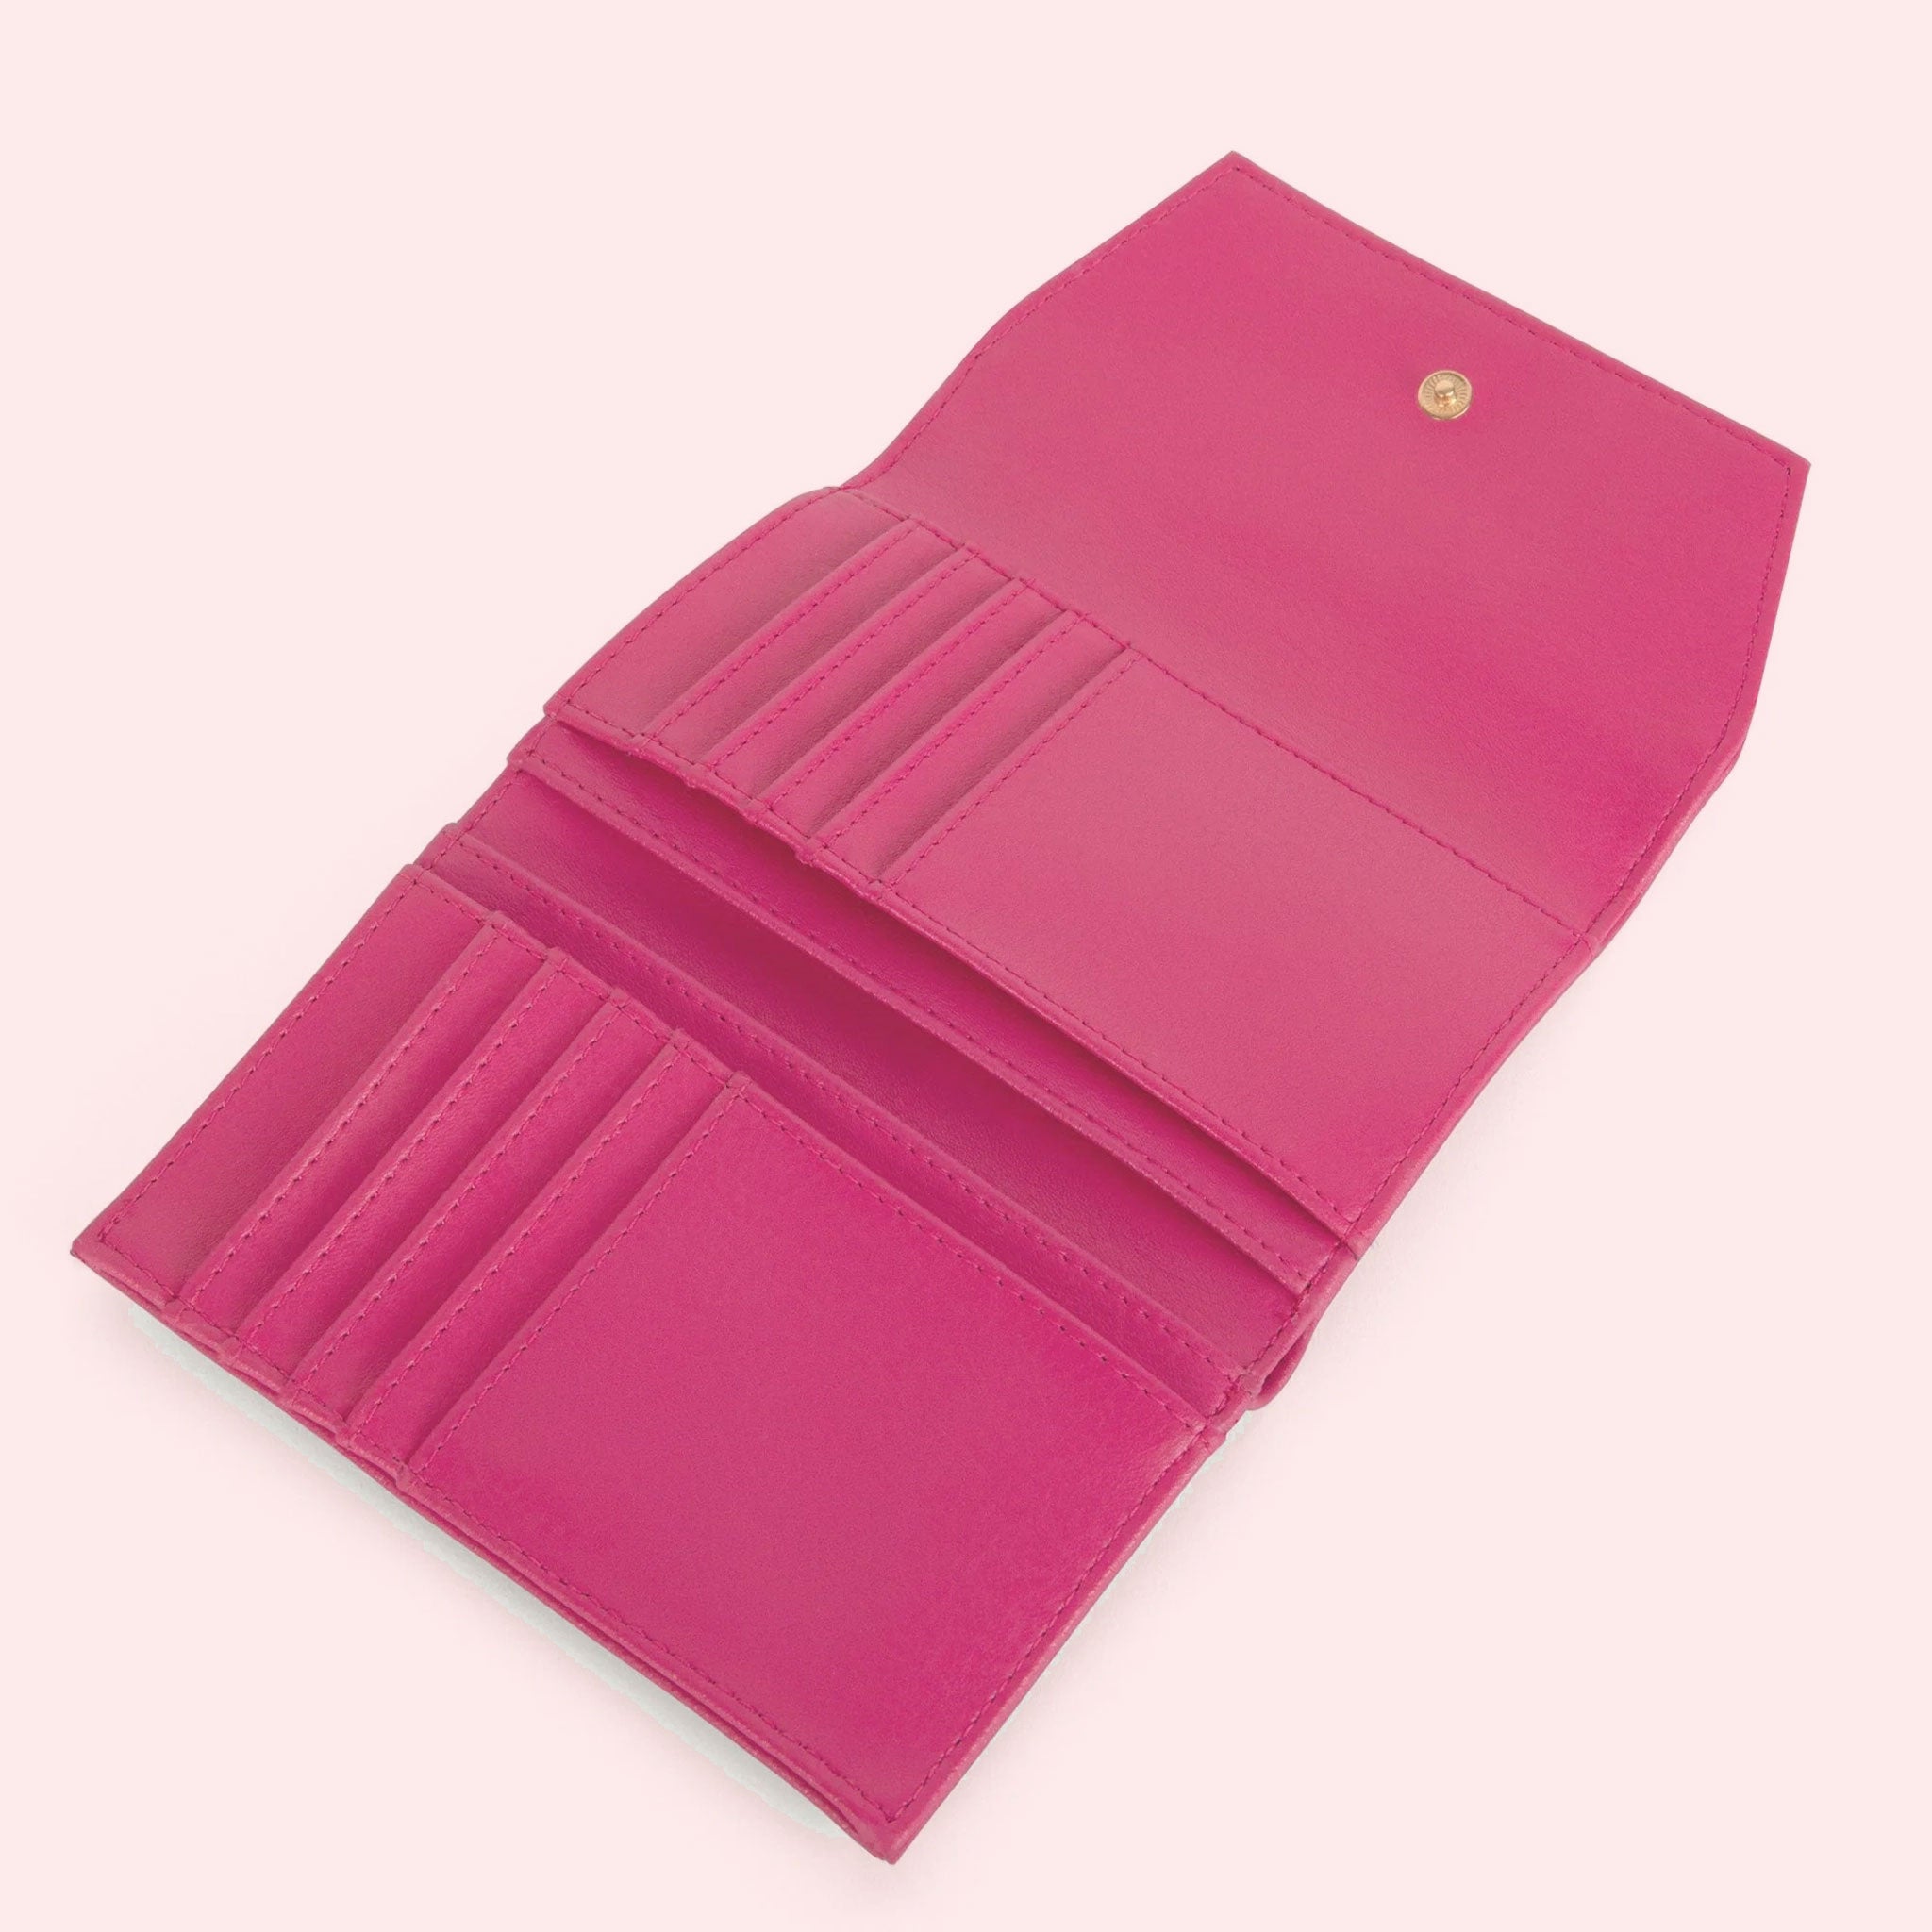 The interior of the pink wallet with 10 card slots and a button closure.